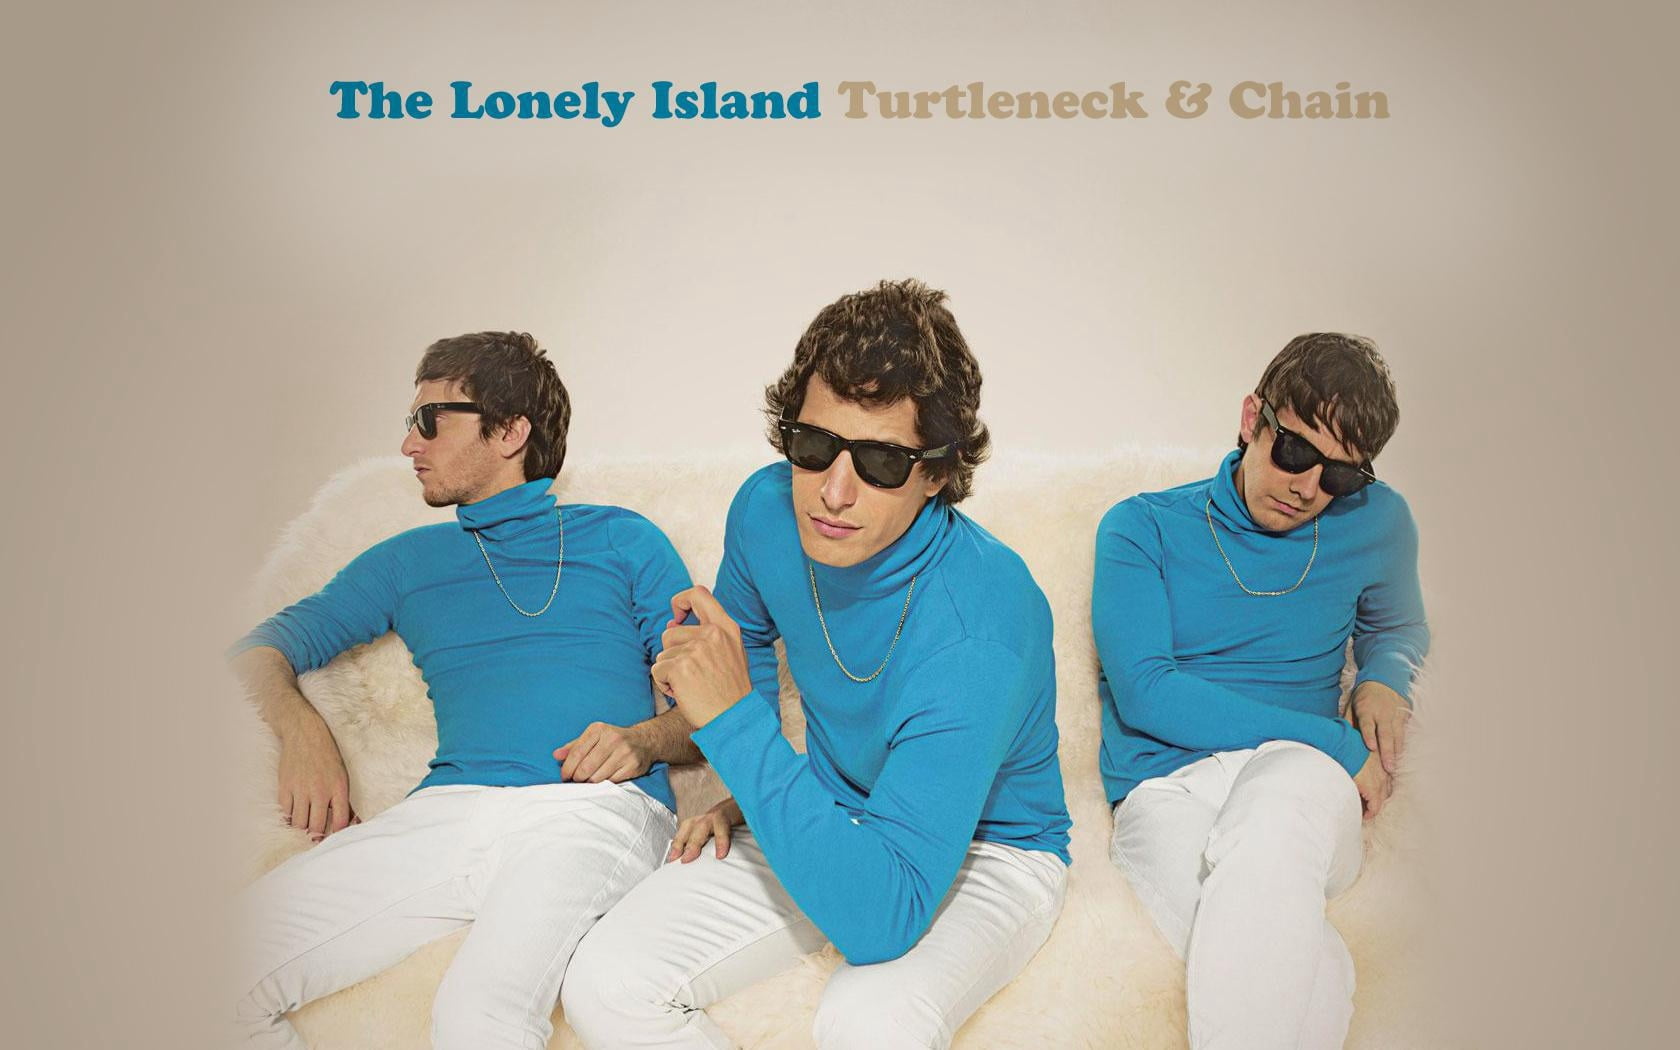 The Lonely Island Turtleneck & Chain poster, armchair, glasses